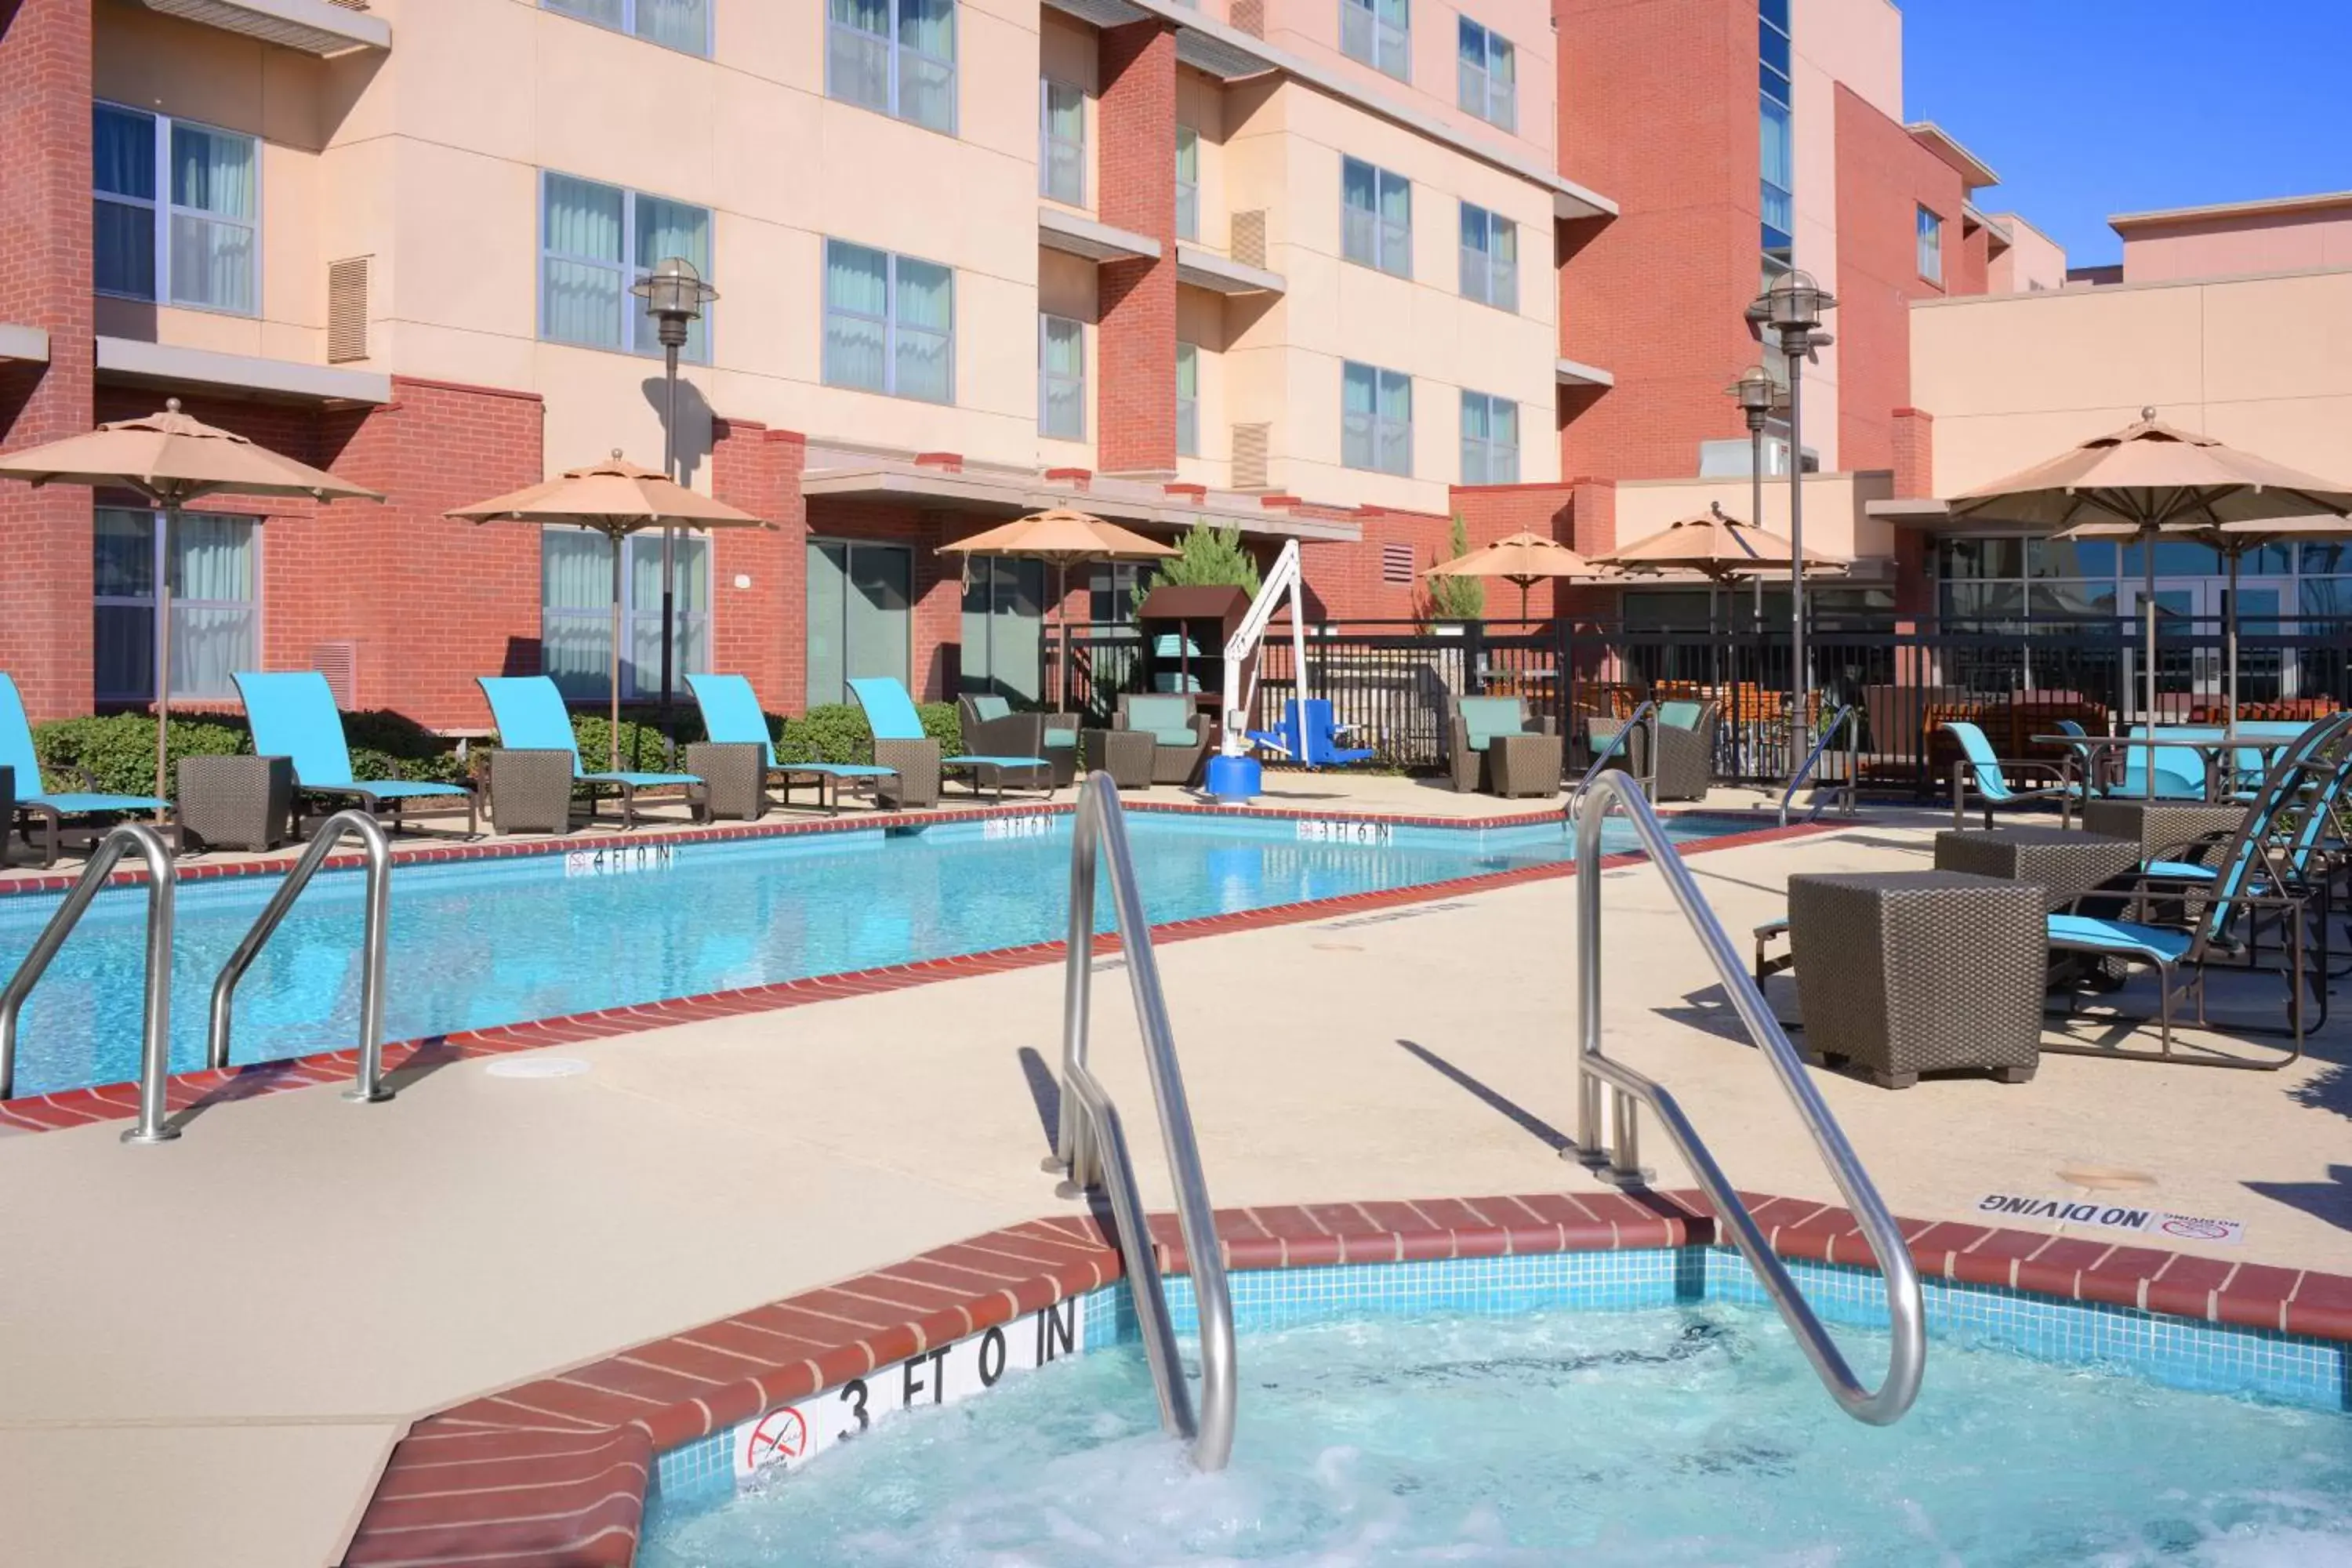 Swimming Pool in Residence Inn by Marriott Dallas Plano The Colony